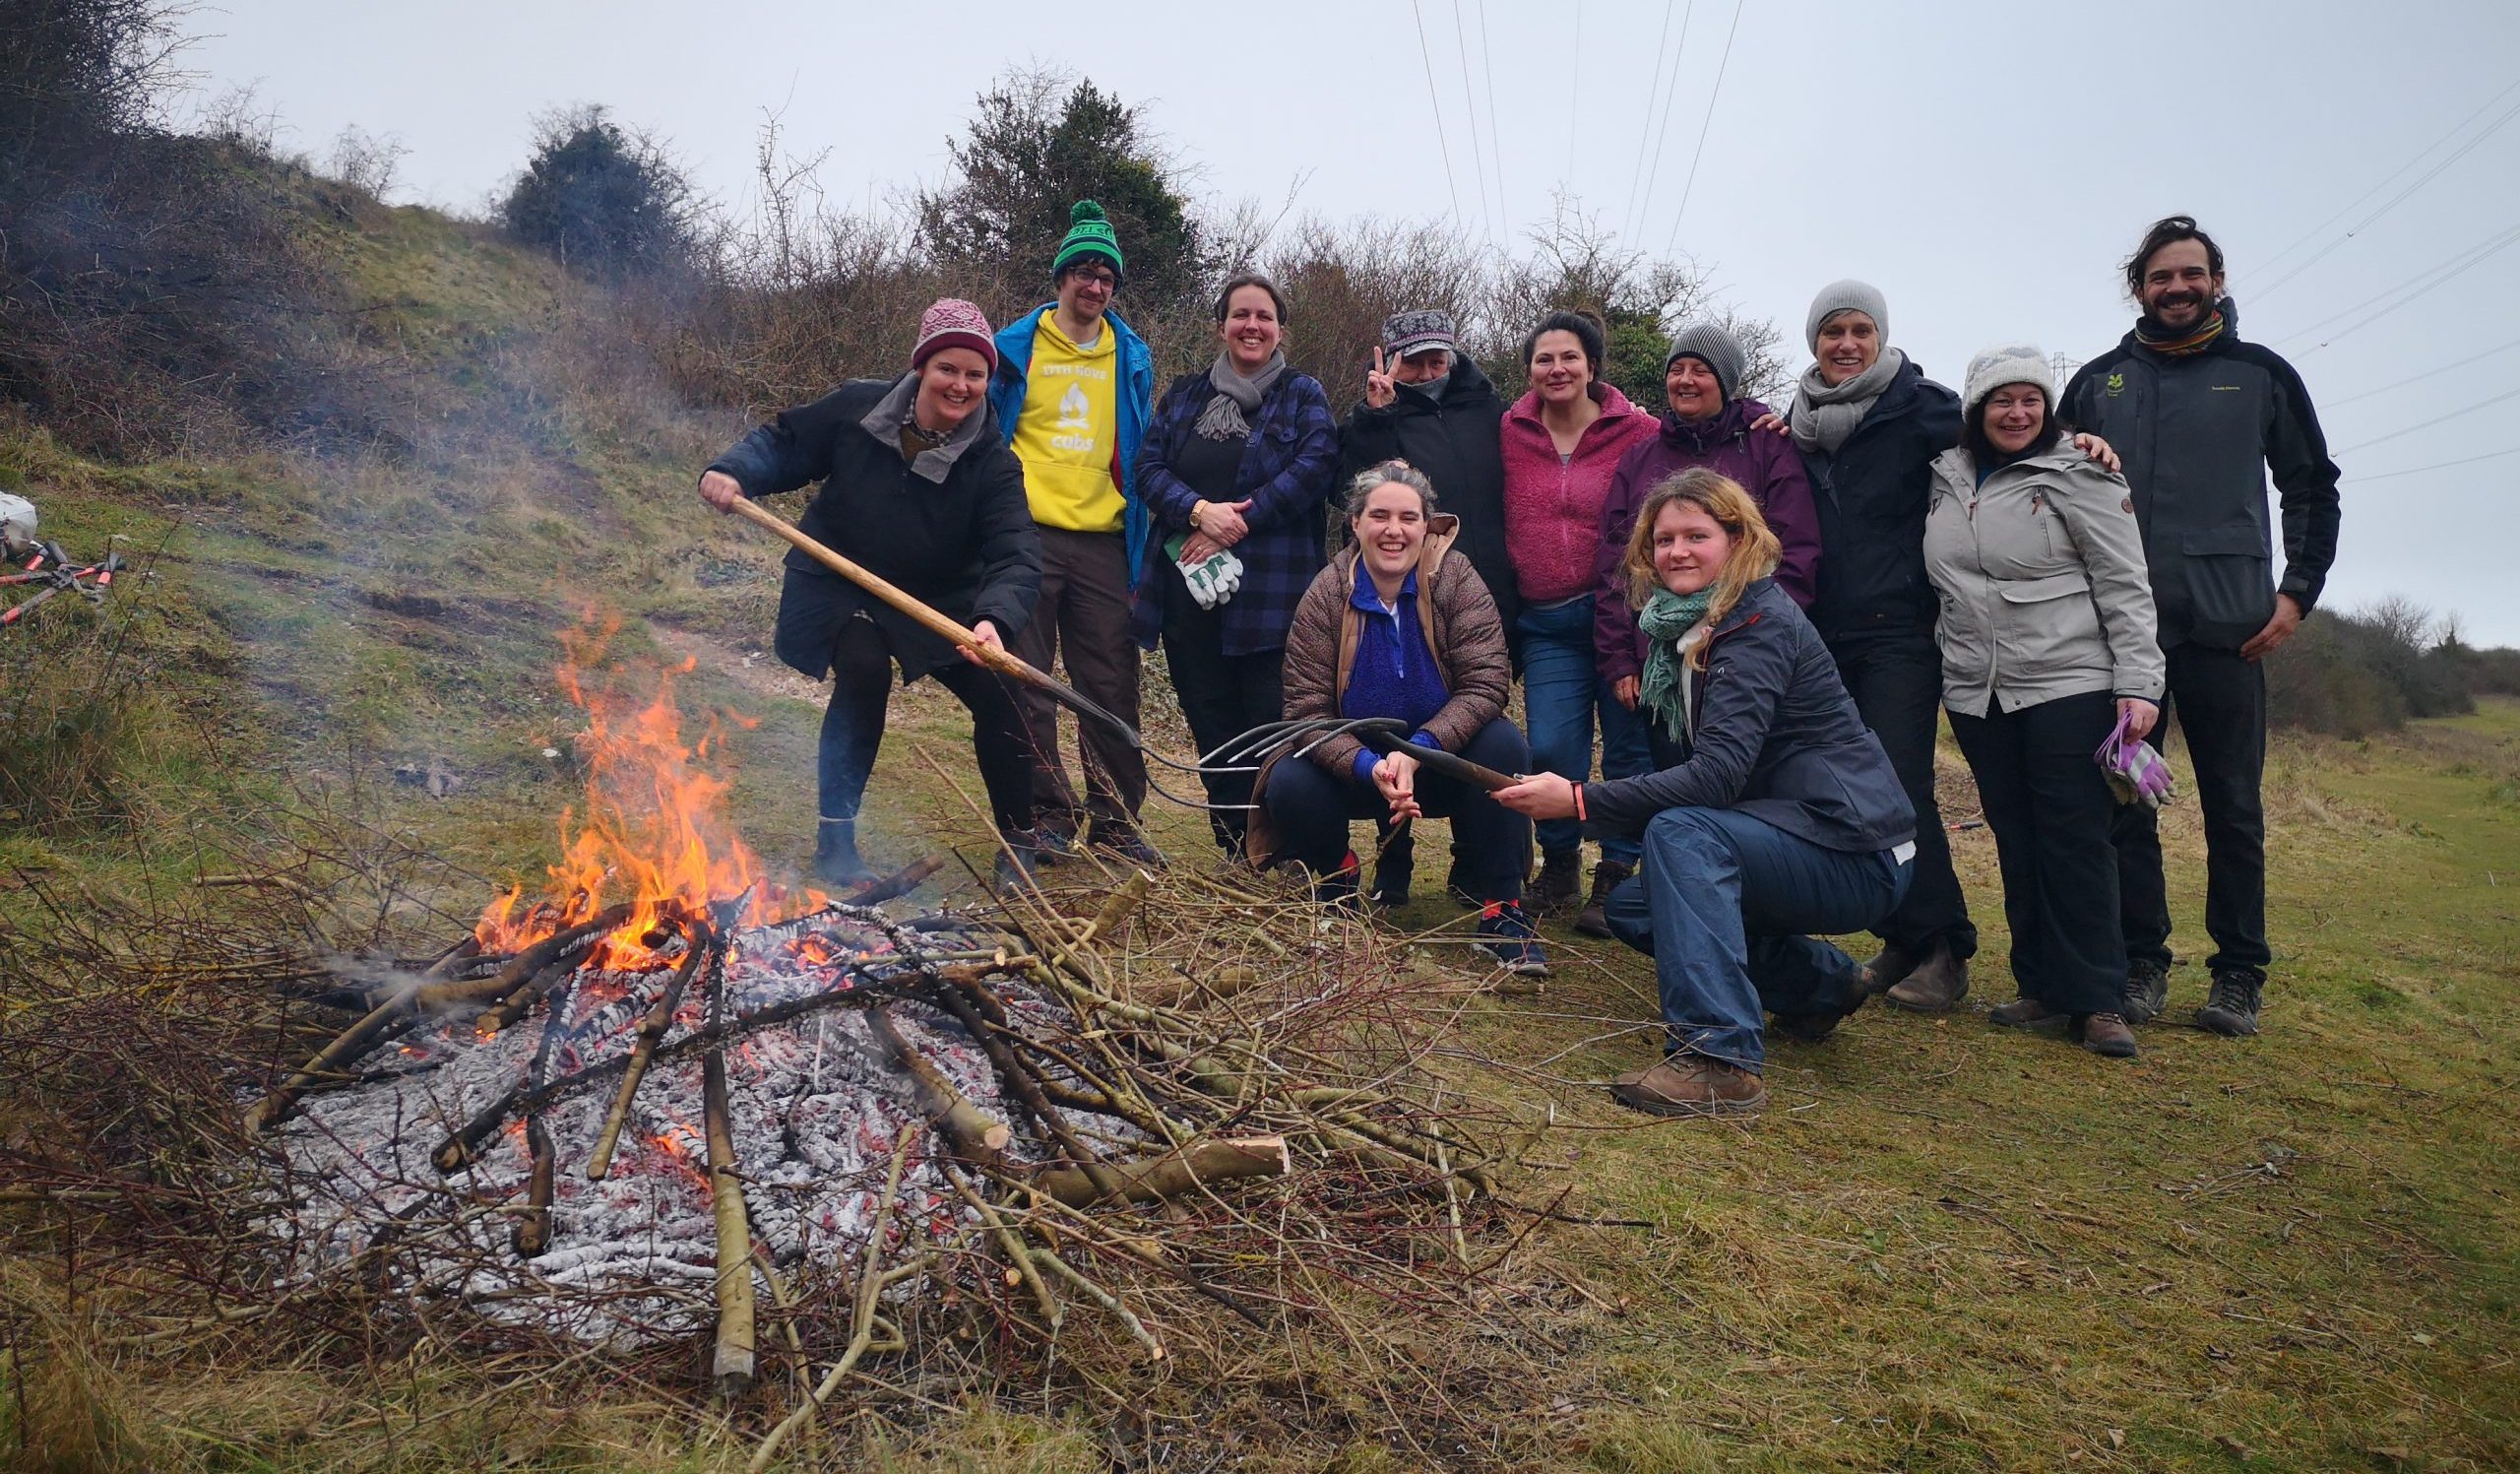 Food Partnership Growing New Roots Wellbeing group on the Sussex downs